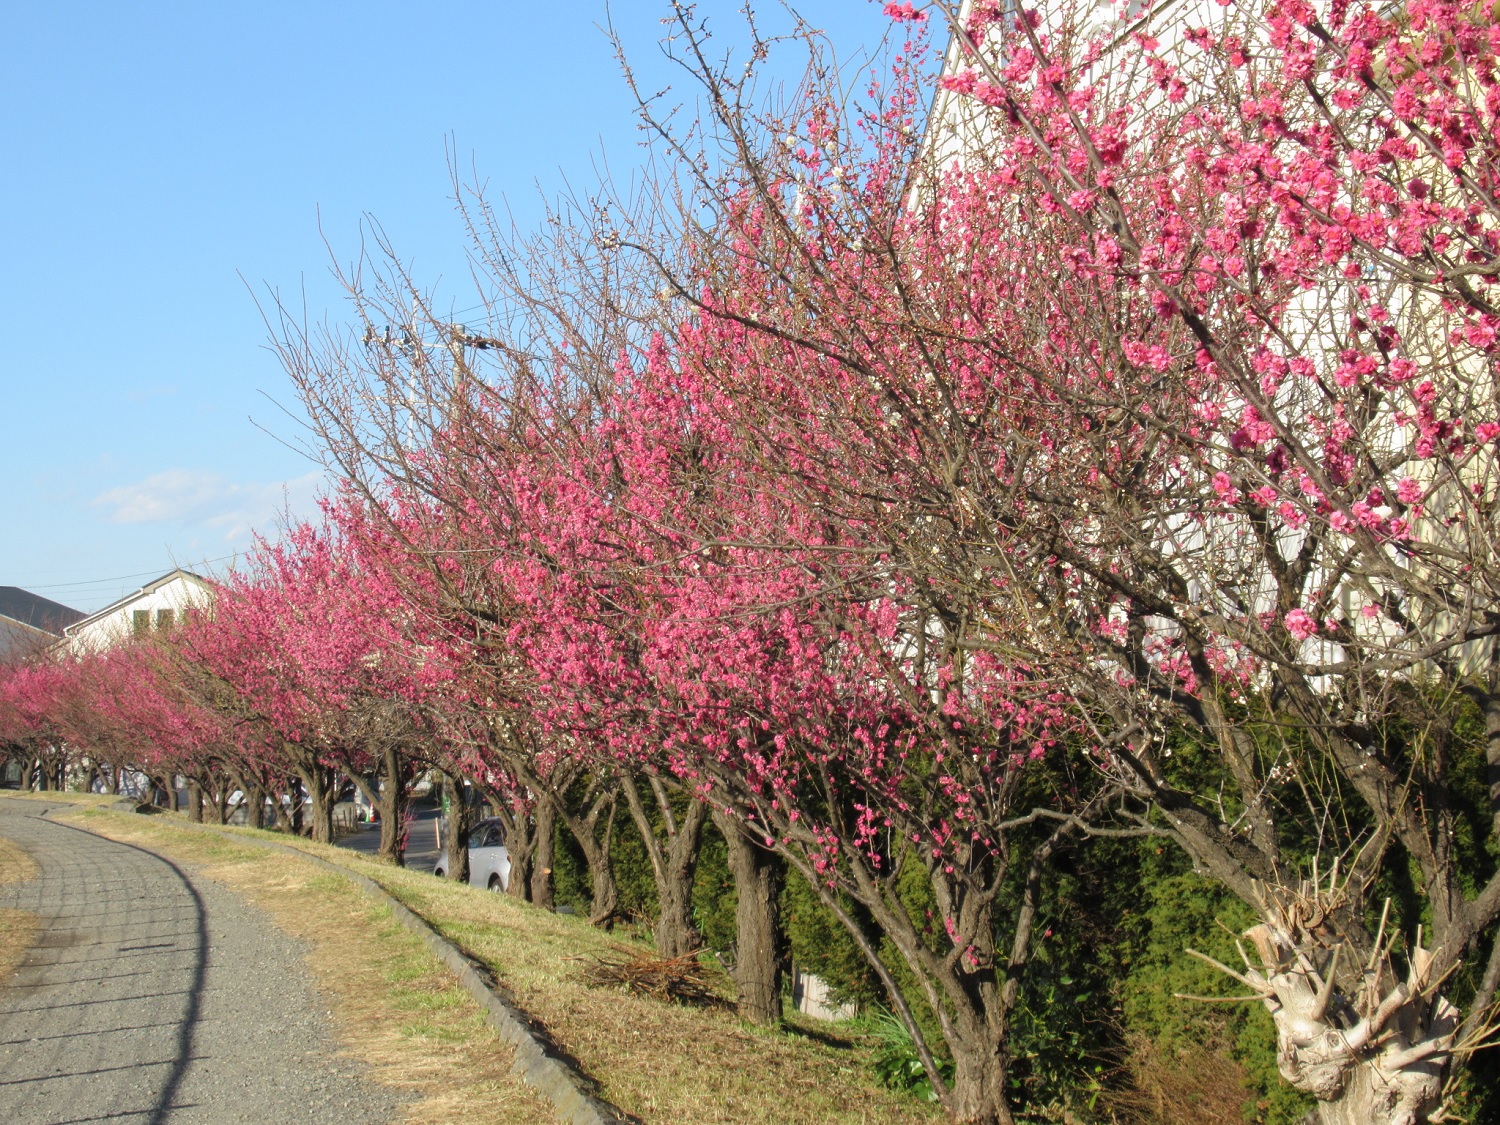 Pink plum blossoms on the Koide River bank